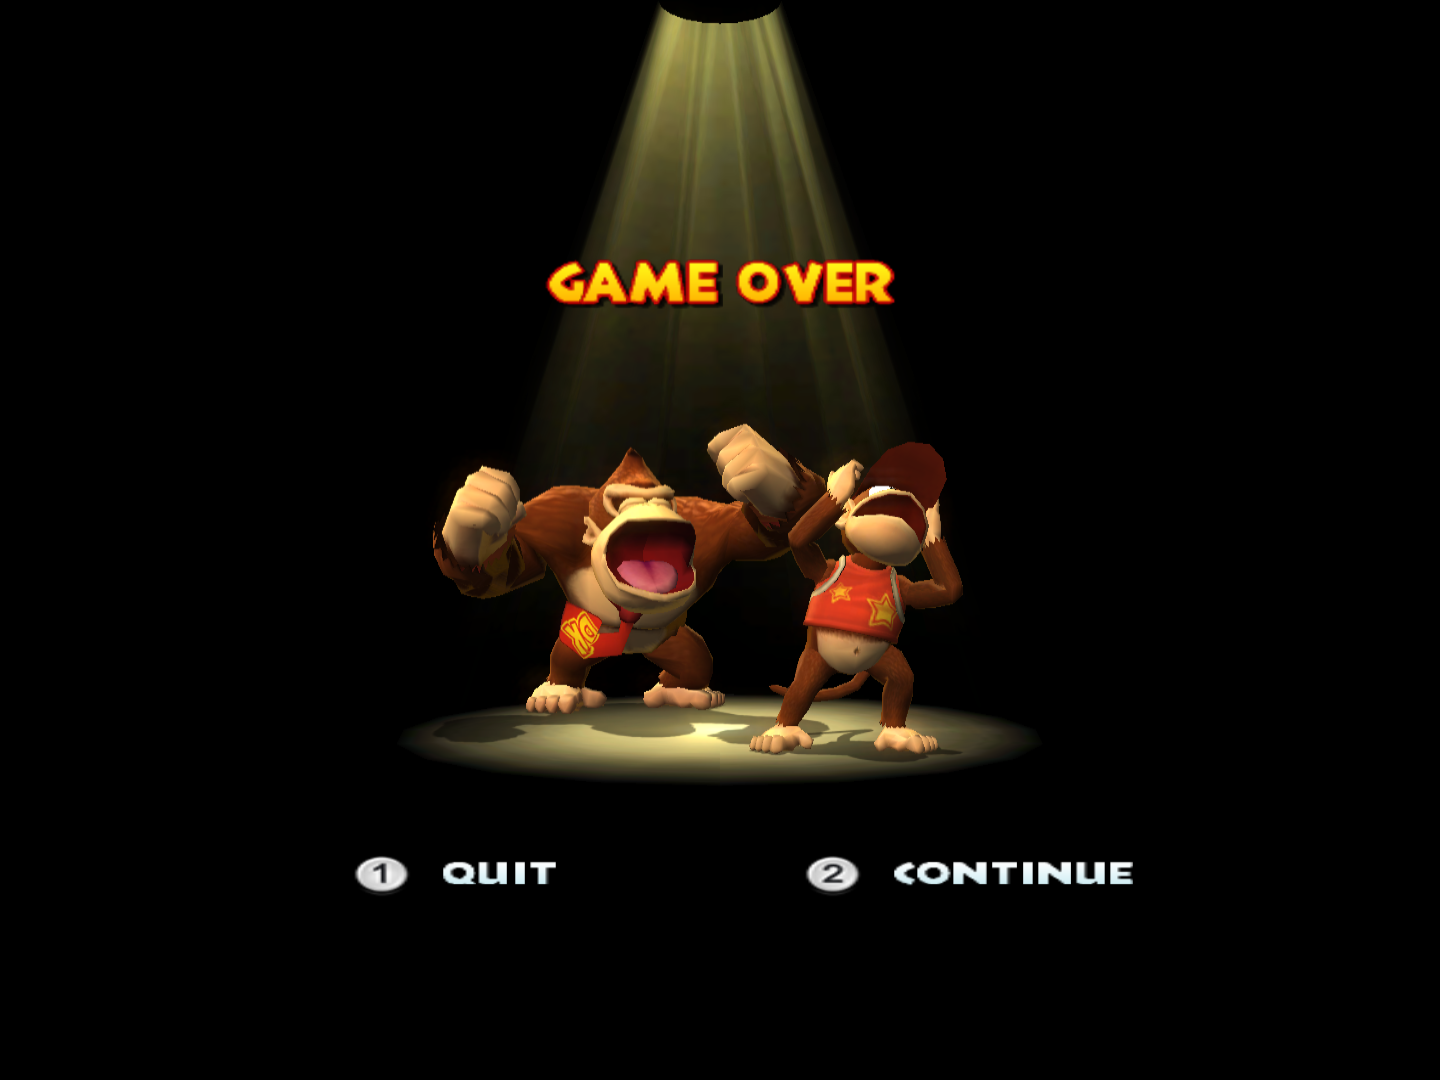 donkey kong country returns wii save game